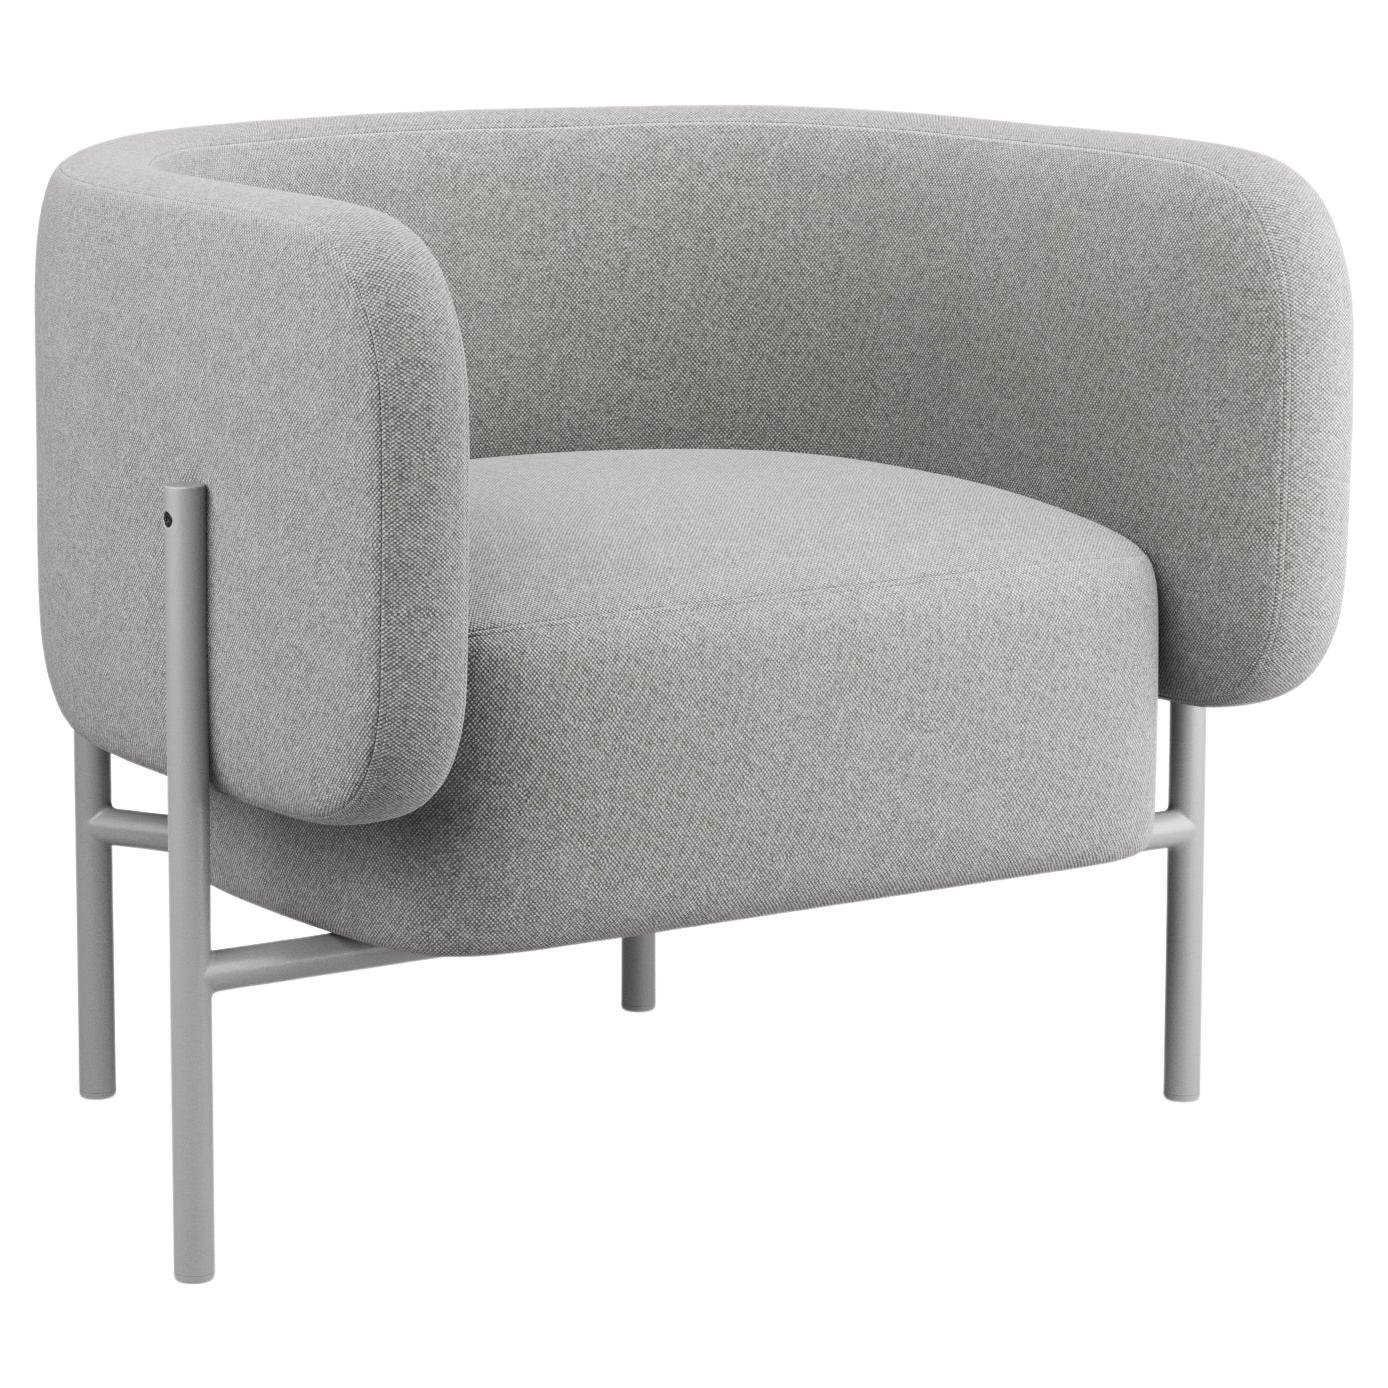 Hayche Abrazo Armchair - Gray, UK, Made to Order For Sale